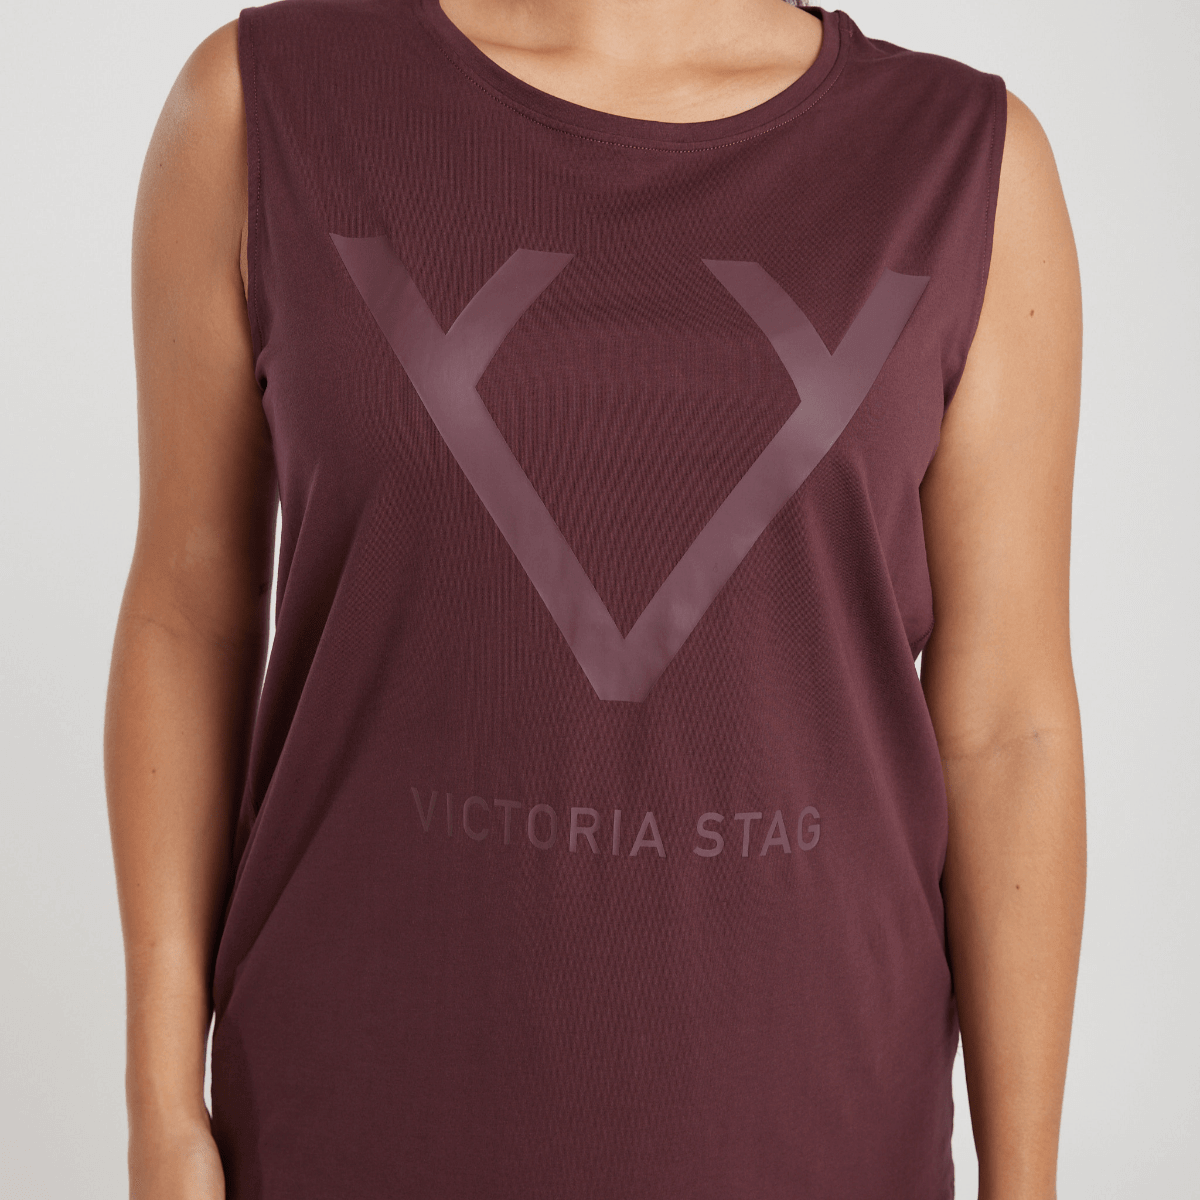 Victoria Stag's Core Muscle Tank in Ox Blood front